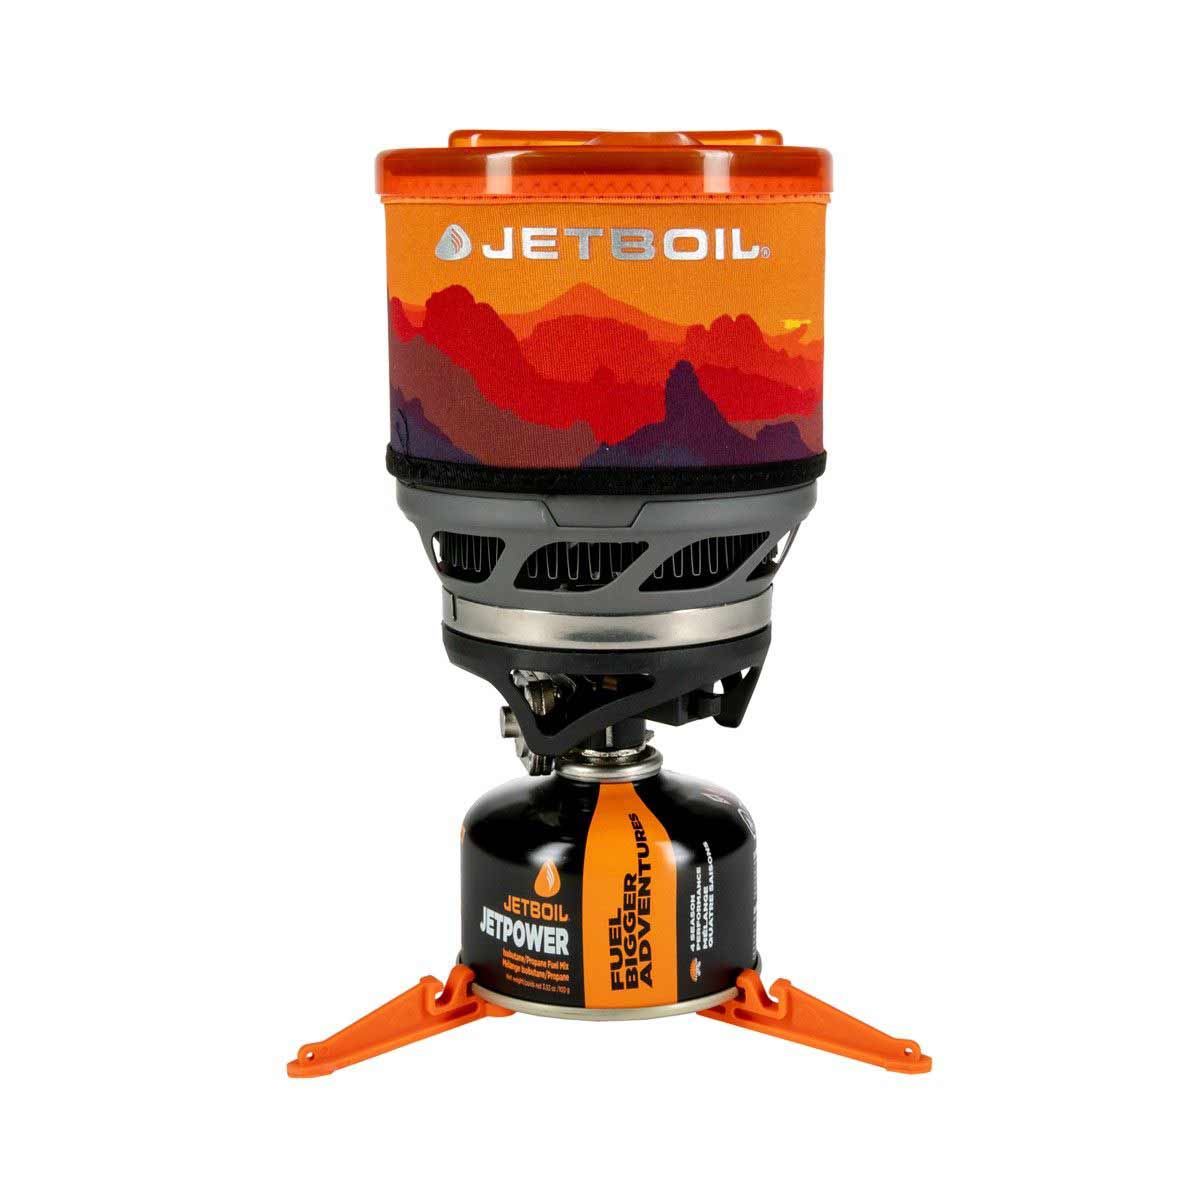 Jetboil backpacking stove